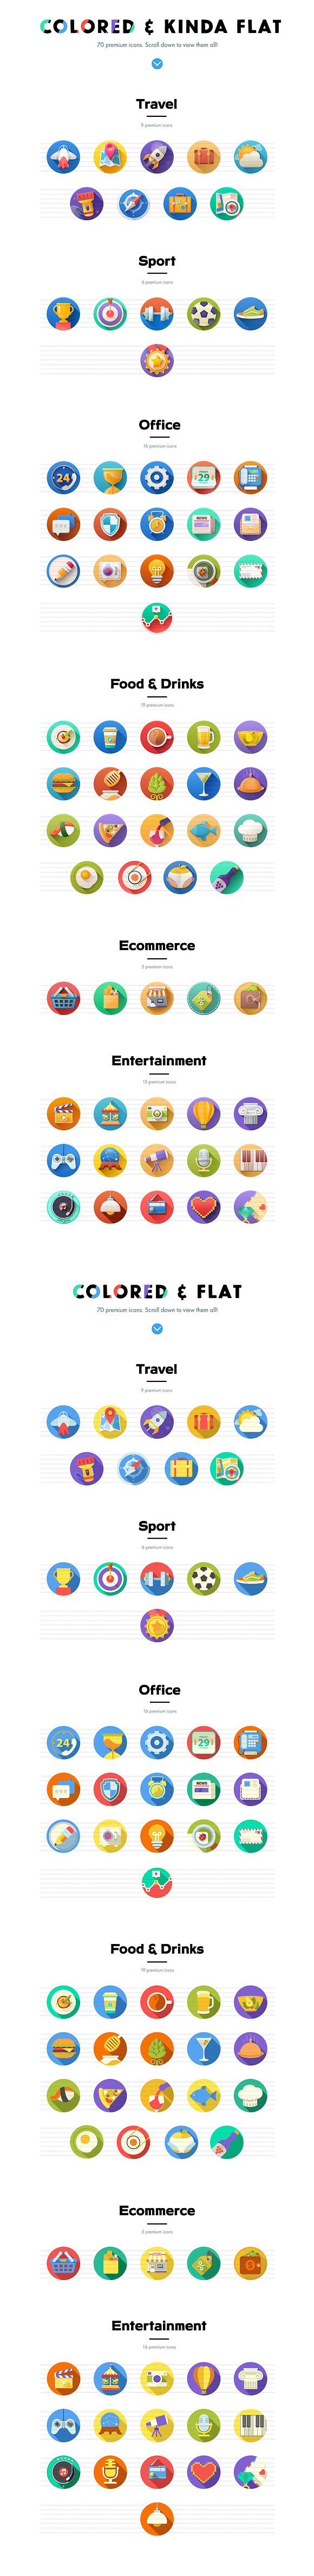 700 Premium Flat icons in Flat Icons - product preview 2